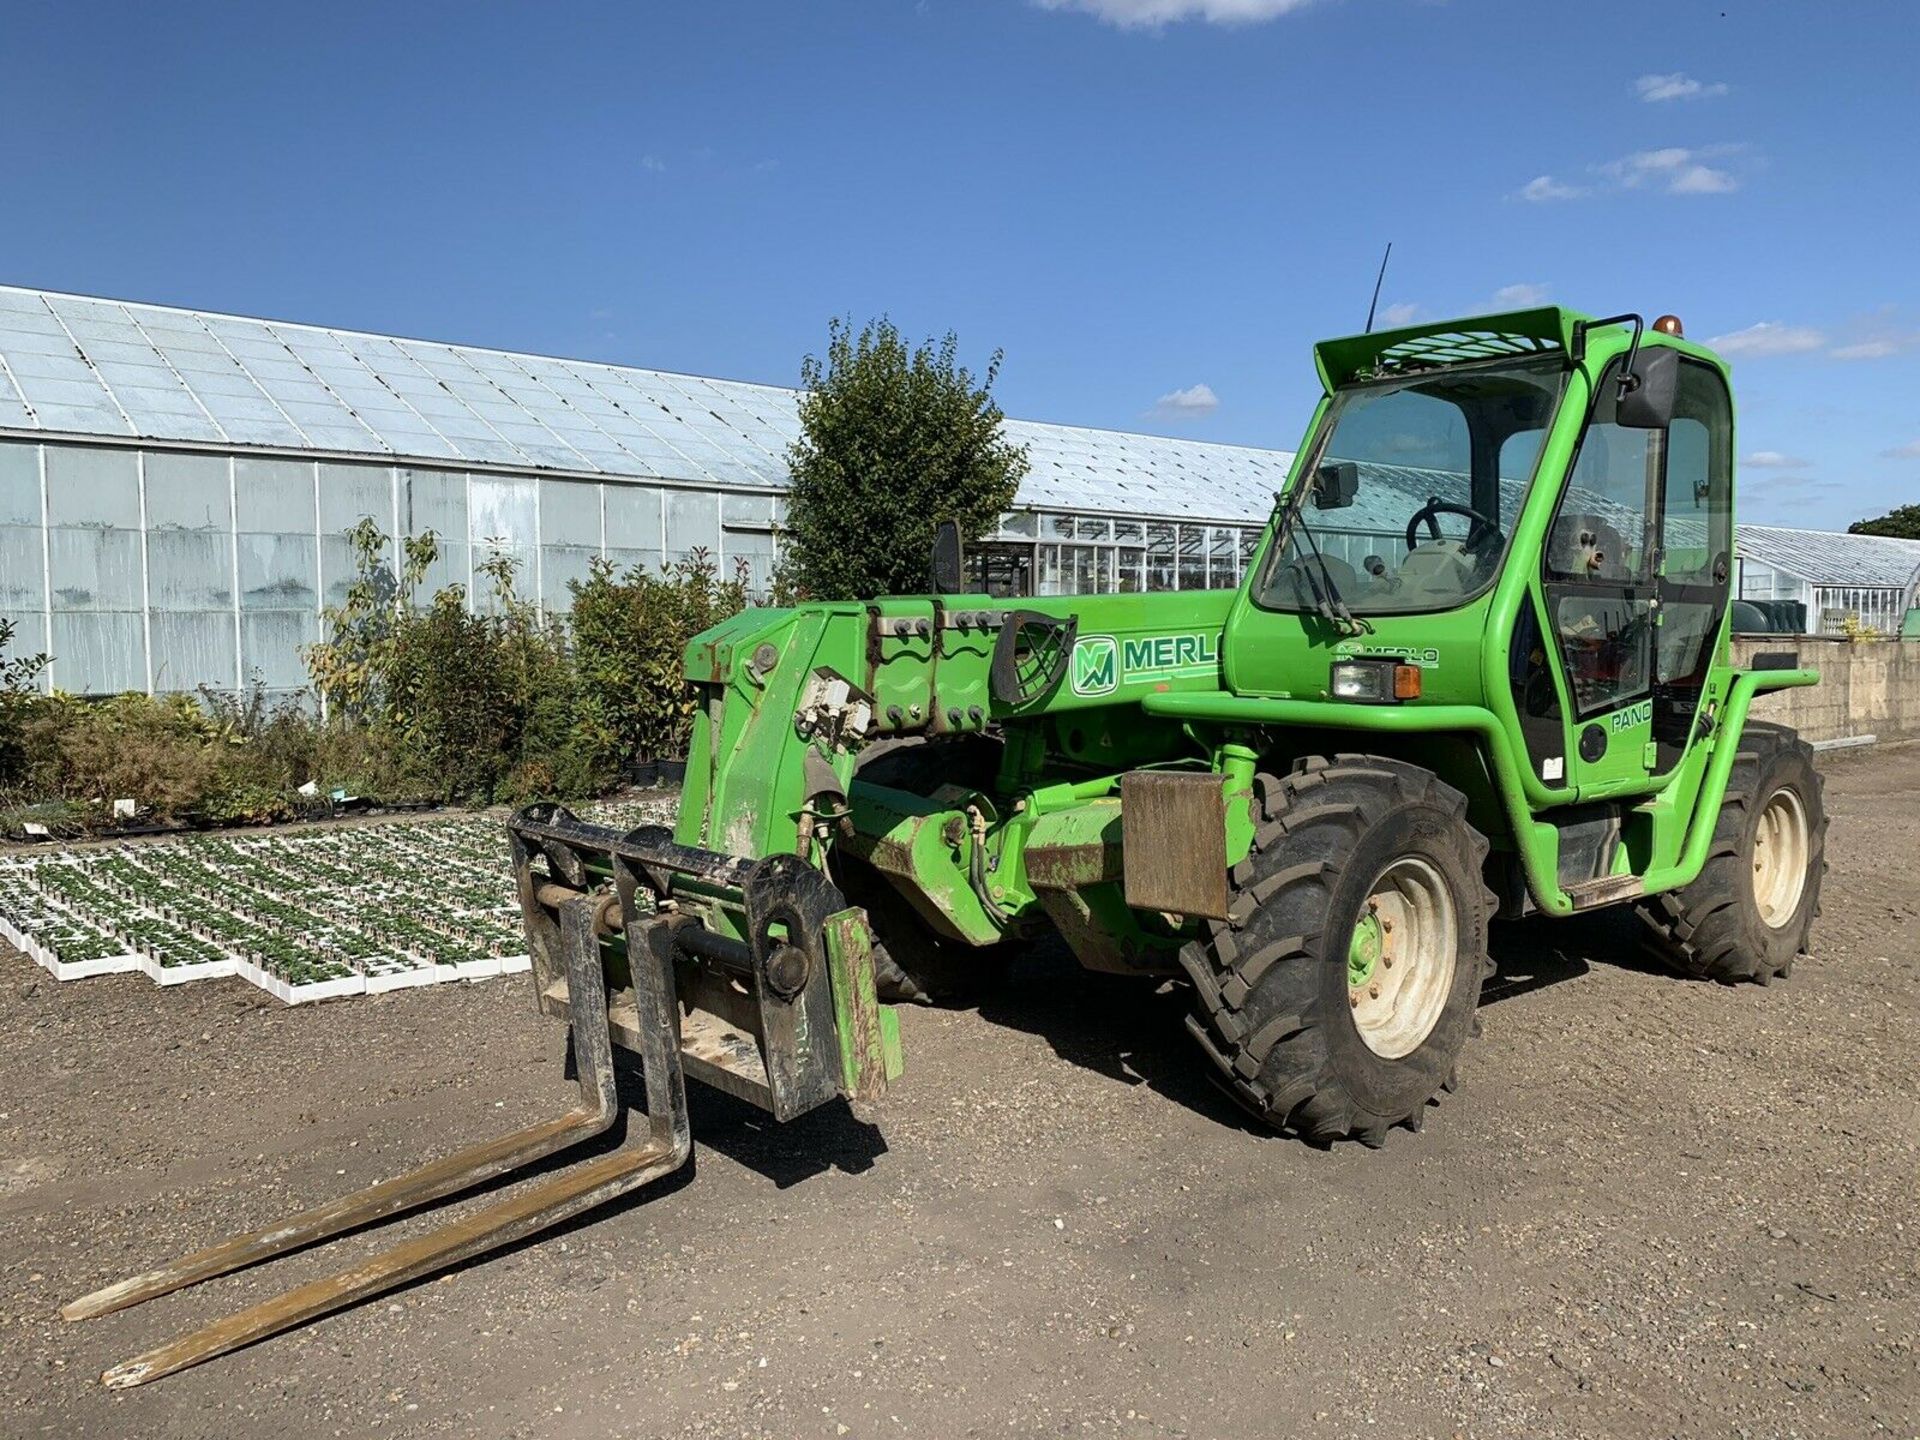 Merlo Telehandler P38.14 Panoramic. 14m reach. Year 2013. Quick hitch, piped for other attachments. - Bild 10 aus 10